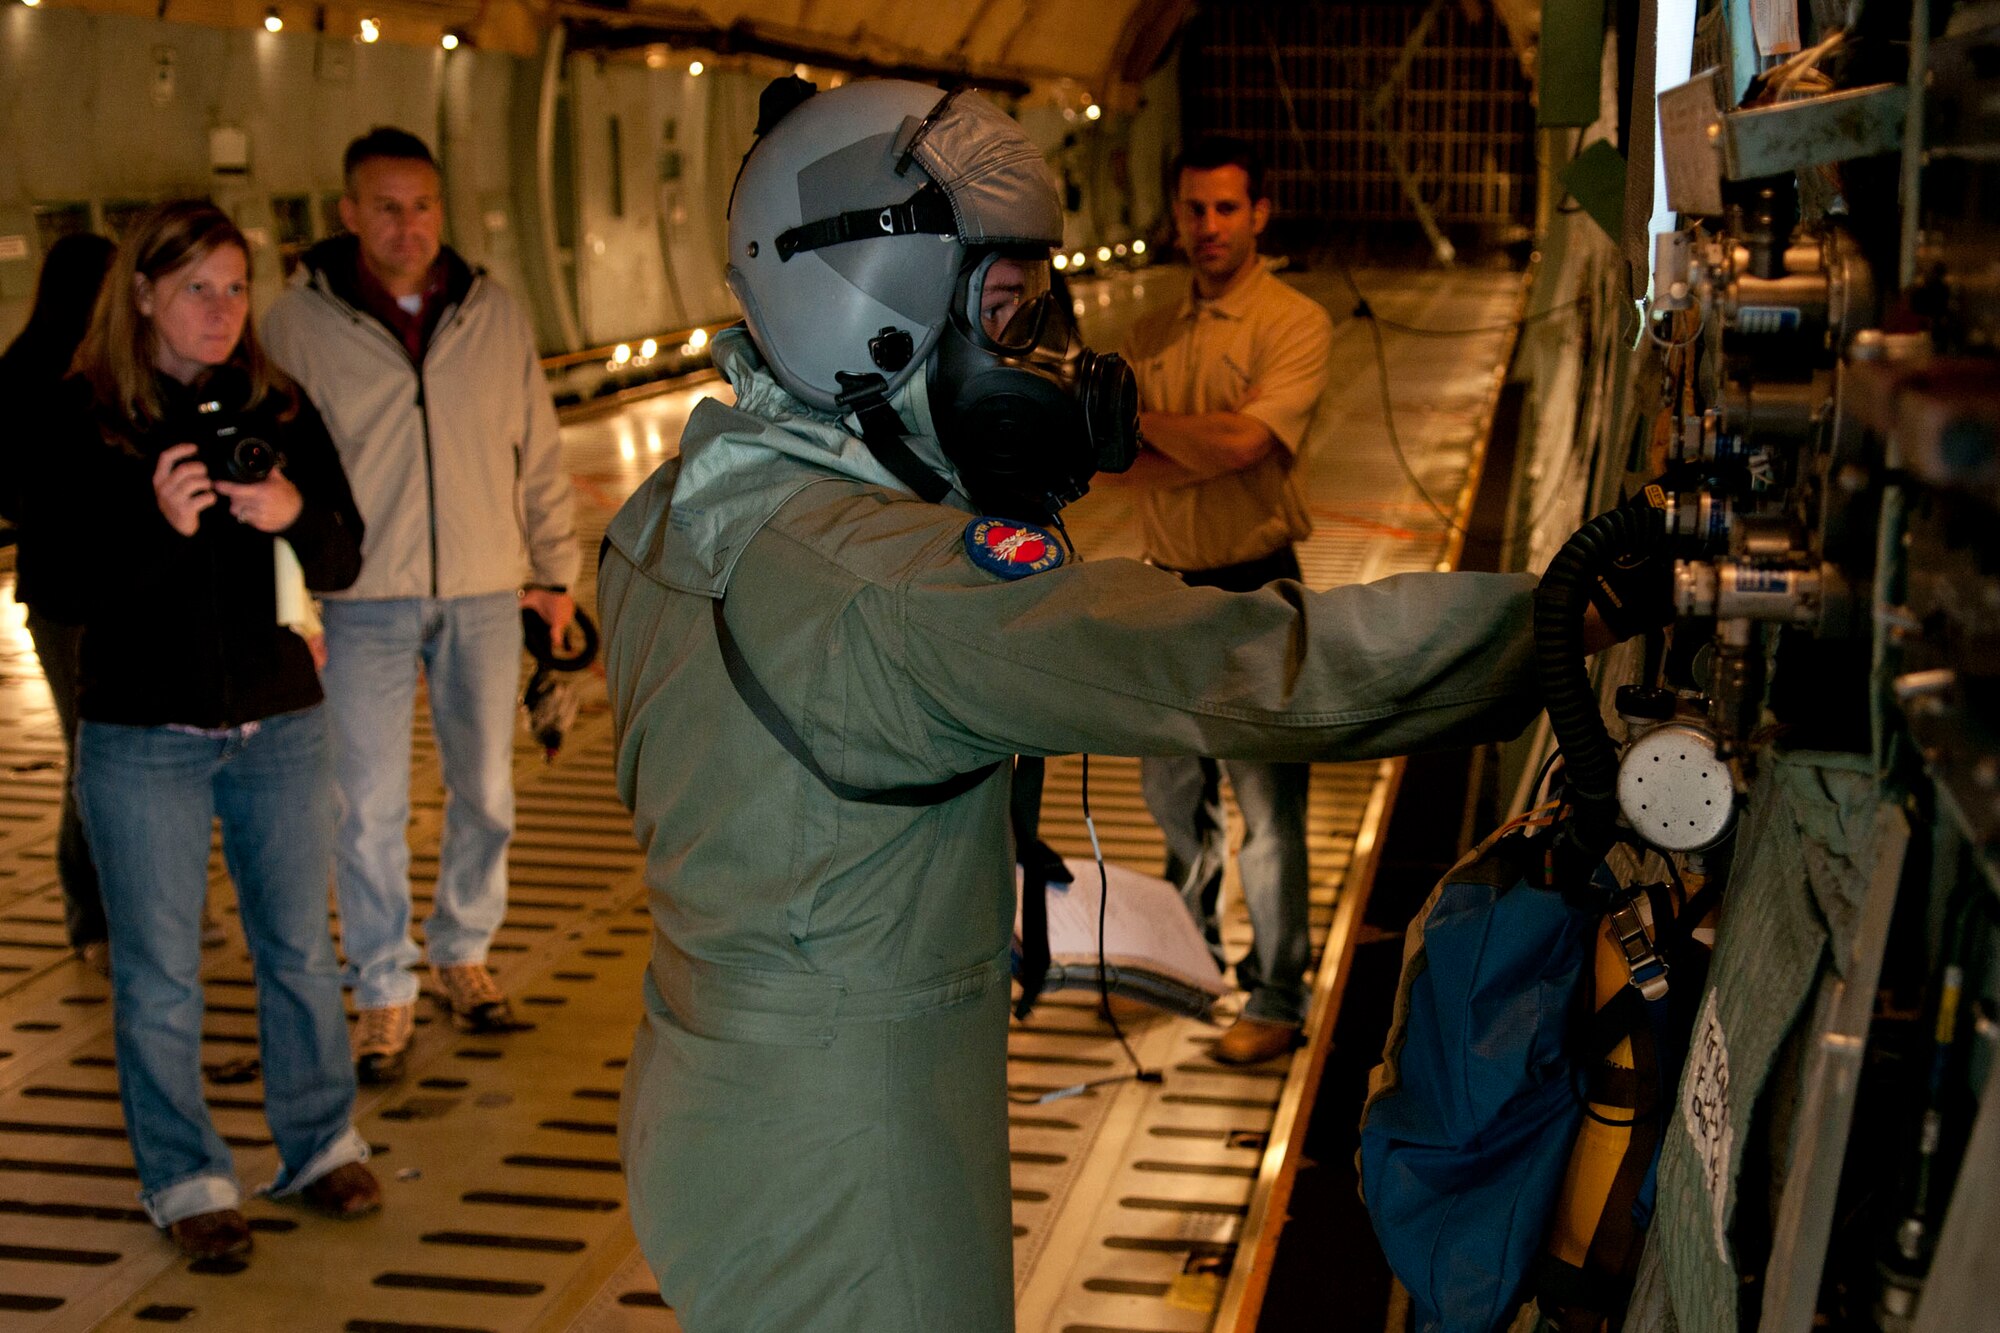 Tech. Sgt. Michael Lindamood, a loadmaster for the 167th Airlift Squadron, performs a preflight inspection while wearing a joint service aircrew mask as a research team for the JSAM observes at the West Virginia Air National Guard in Martinsburg, W.Va., Dec. 7, 2011. A Department of Defense research team working on the development of a joint service aircrew mask conducted field assessments at the 167th Airlift Wing. (Air National Guard photo/Master Sgt. Emily Beightol-Deyerle)